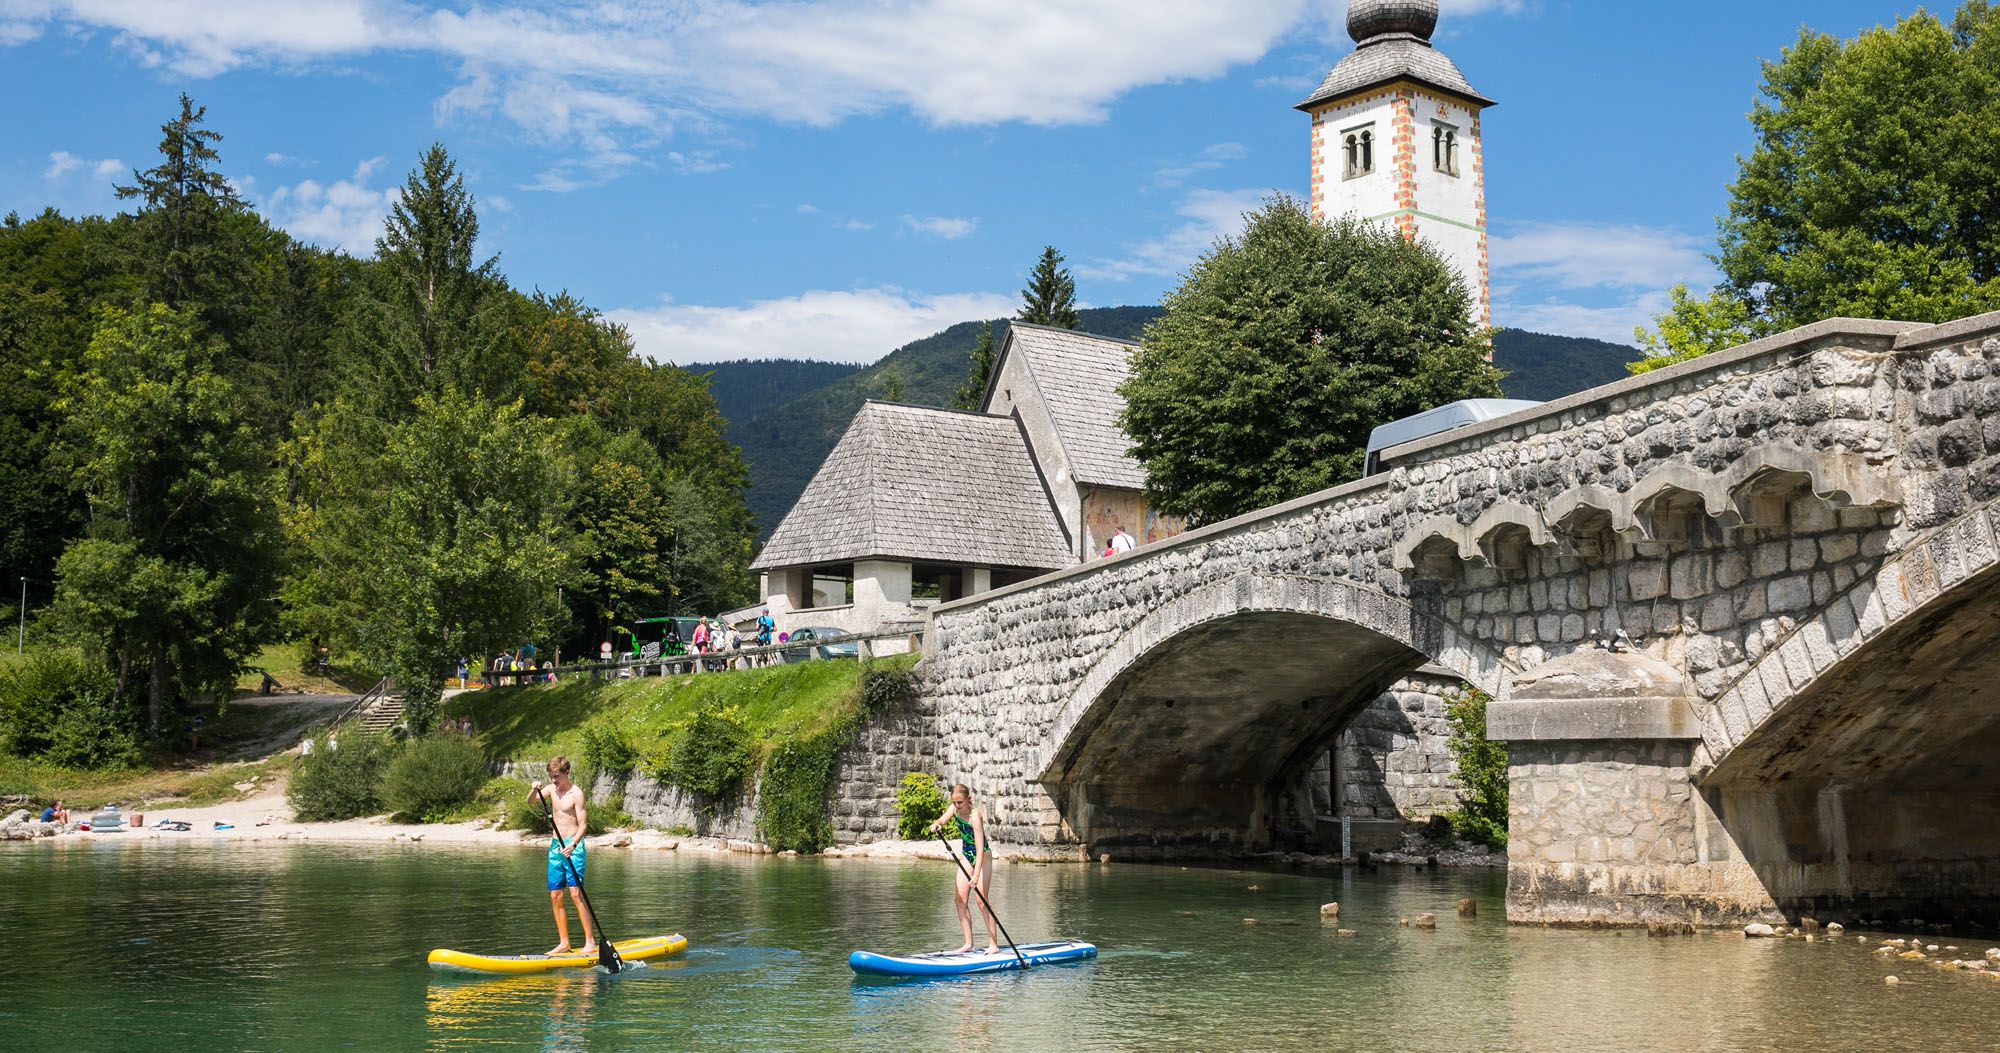 Featured image for “20 Epic Things to Do in Slovenia”